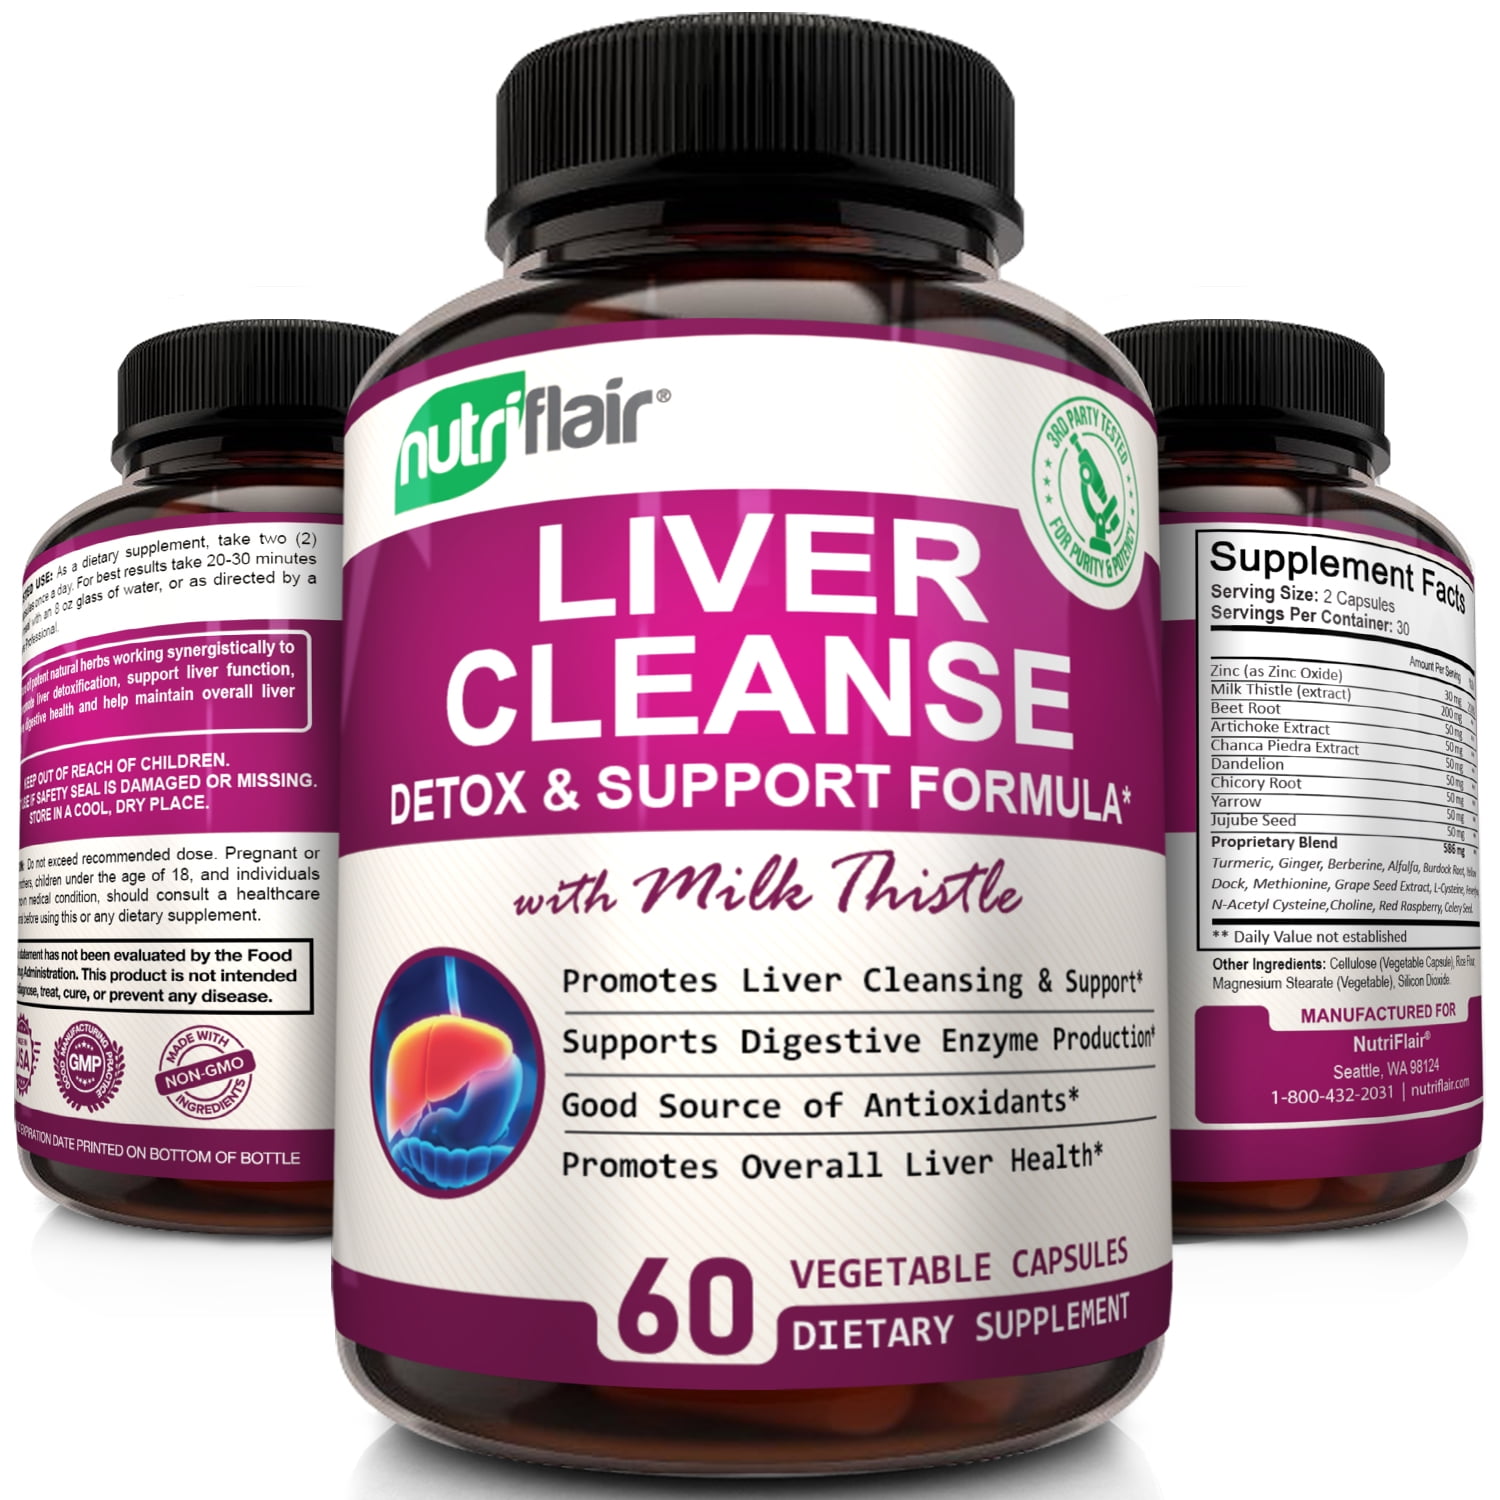 Liver cleanse tablets